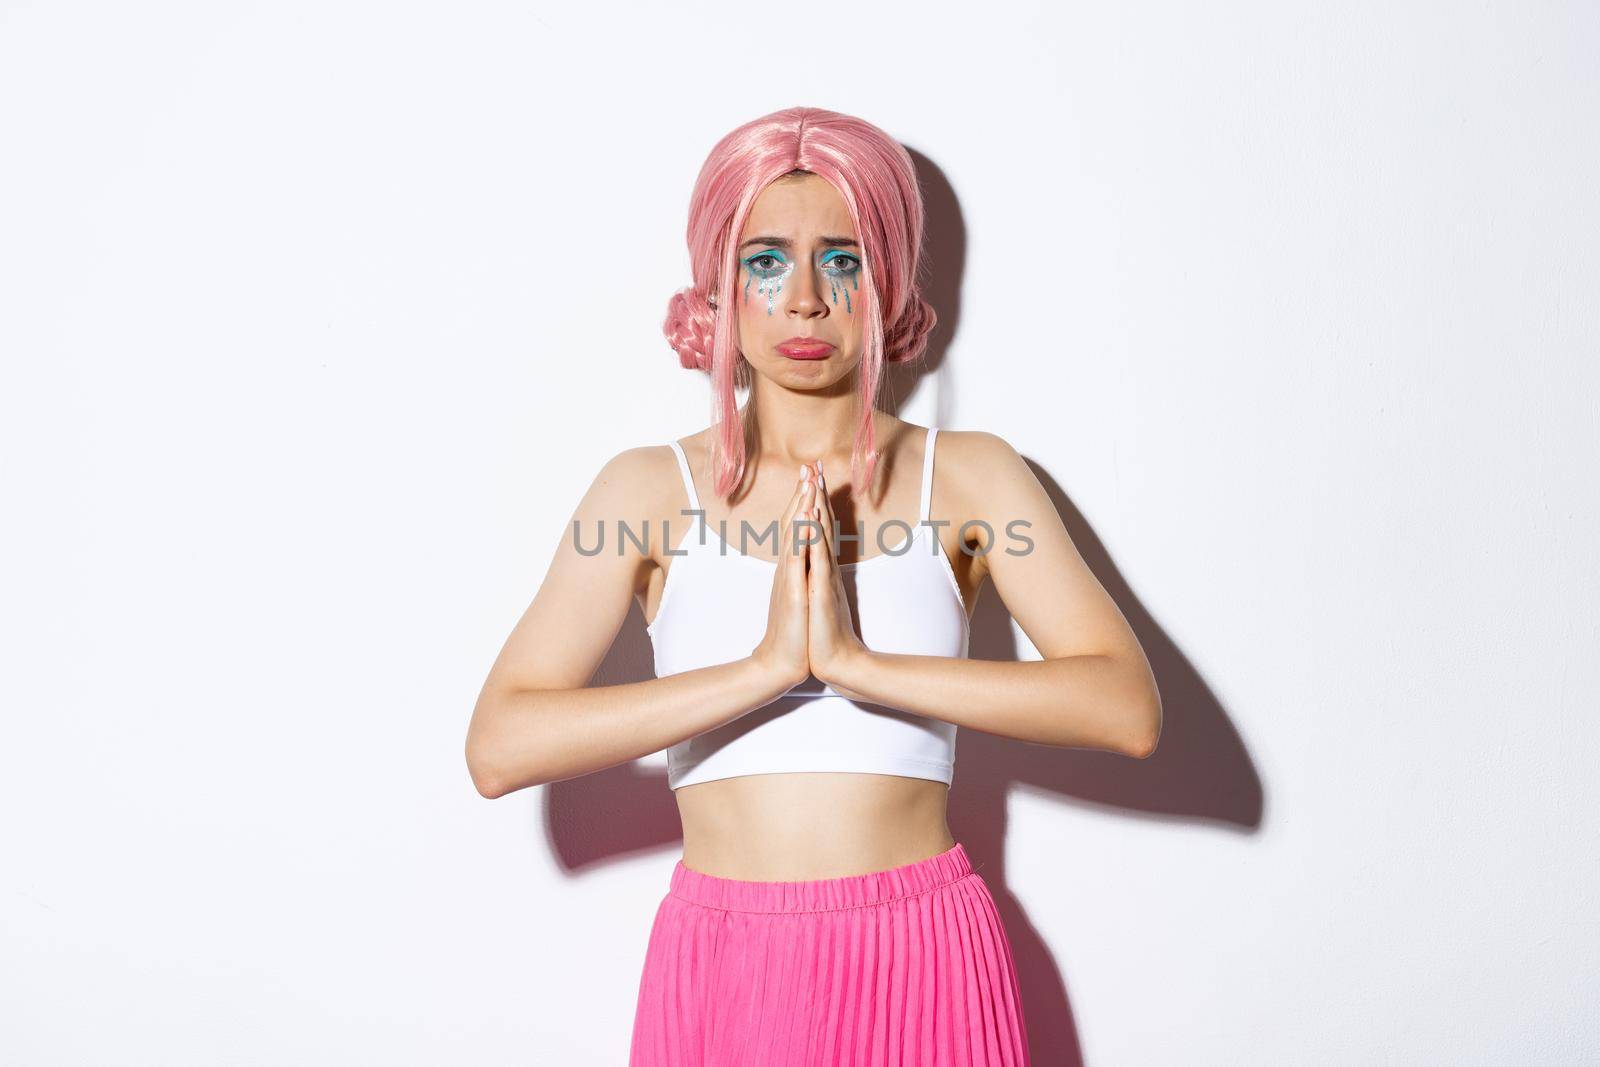 Portrait of miserable cute girl in pink anime wig asking for help, clasp hands together and begging for something, standing in halloween outfit over white background.